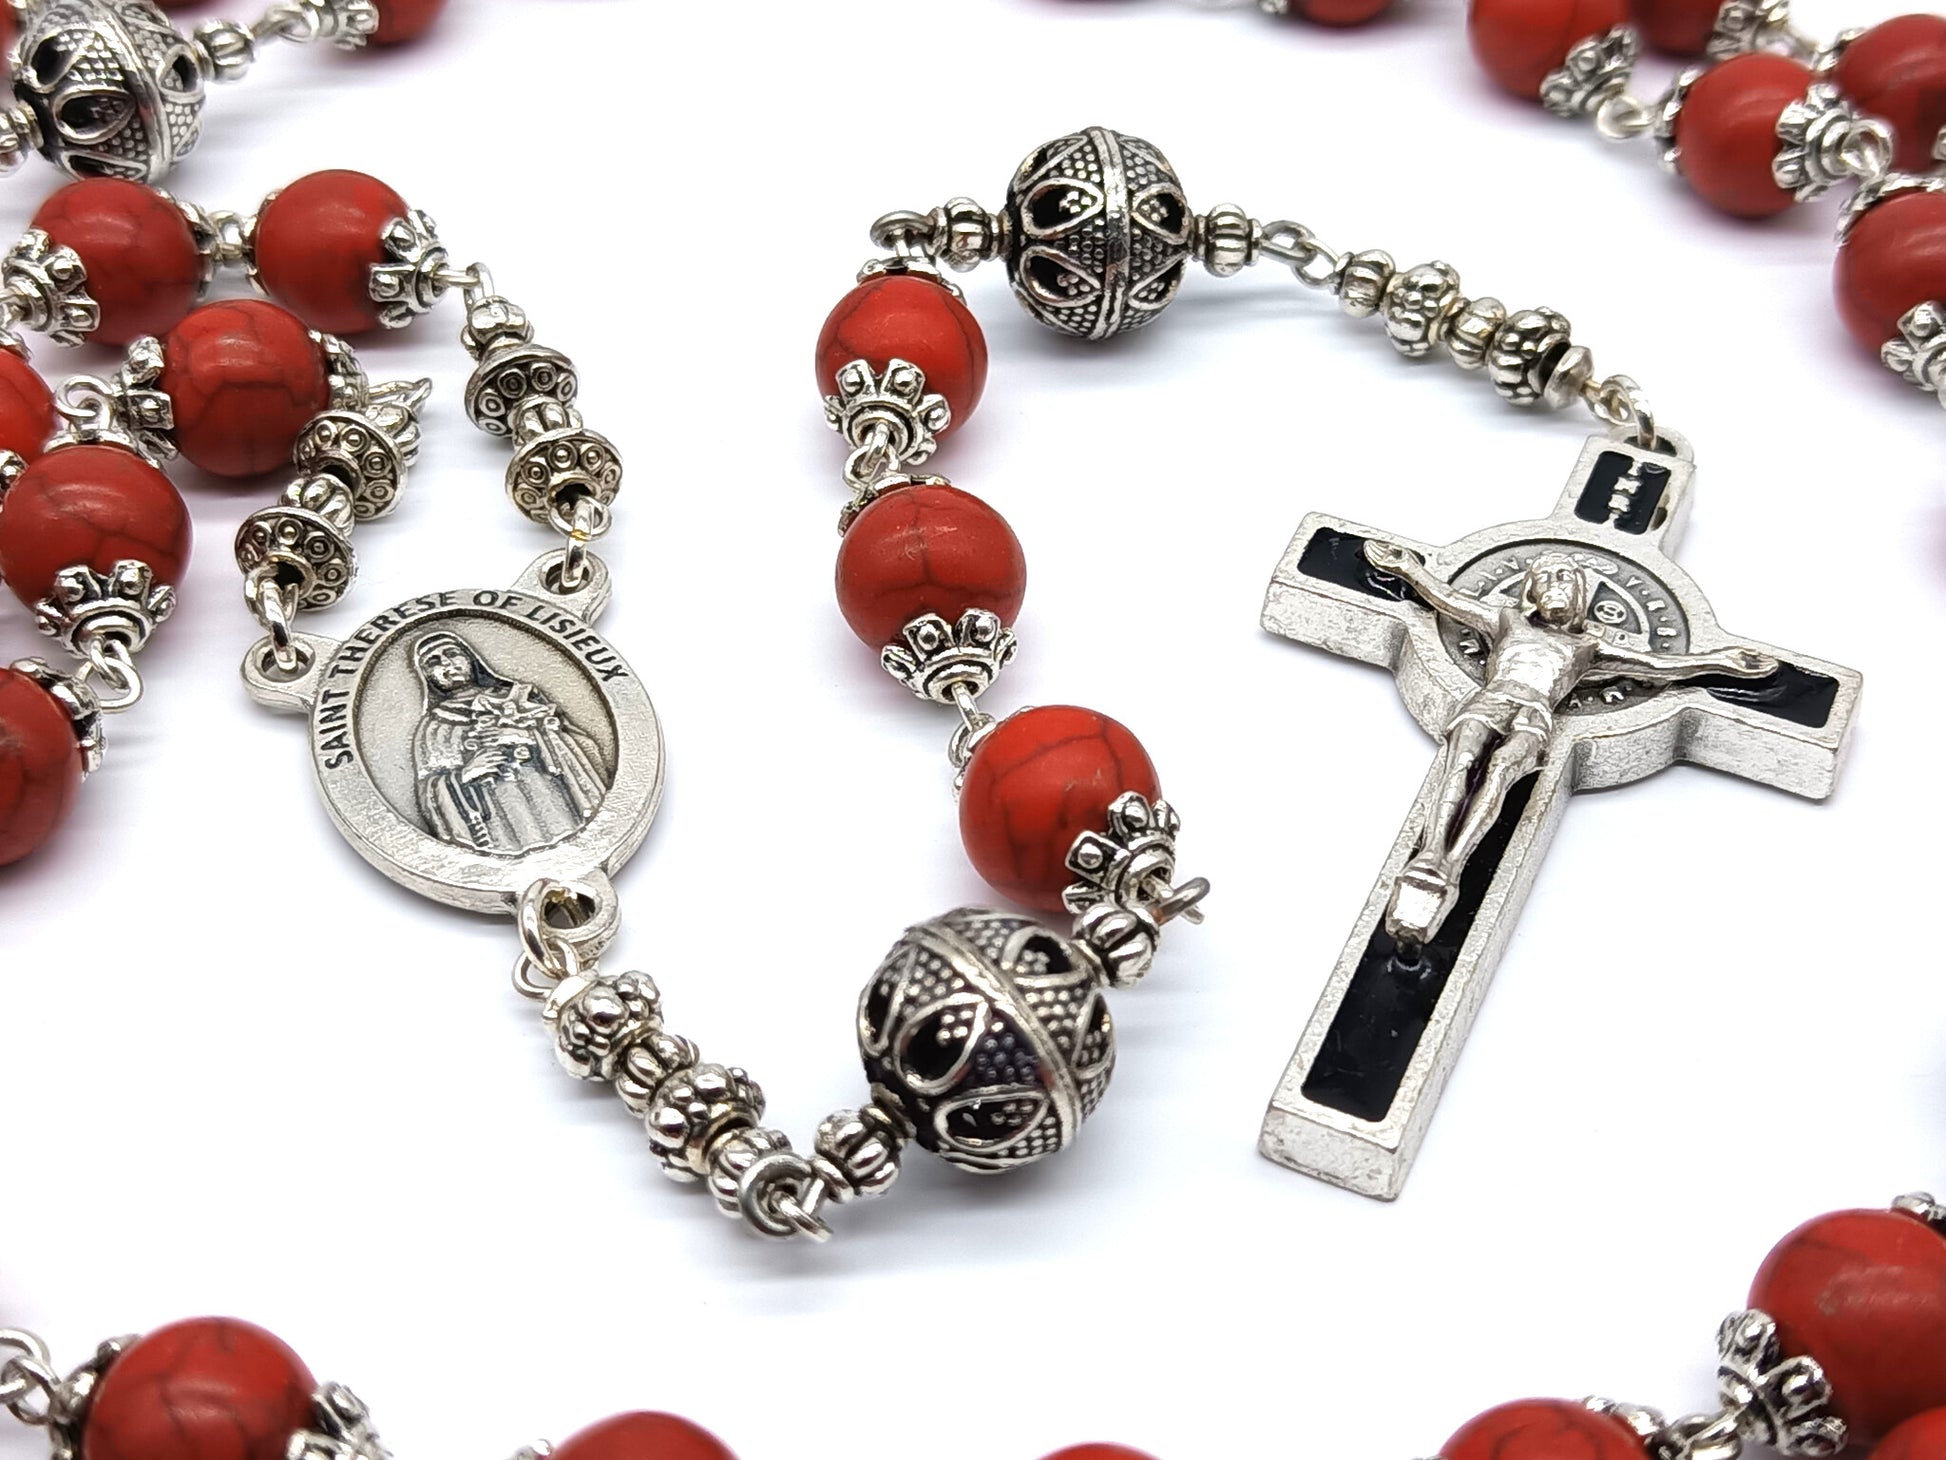 Saint Therese of Lisieux unique rosary beads with red gemstone beads and silver pater beads, caps, black enamel crucifix and medal.